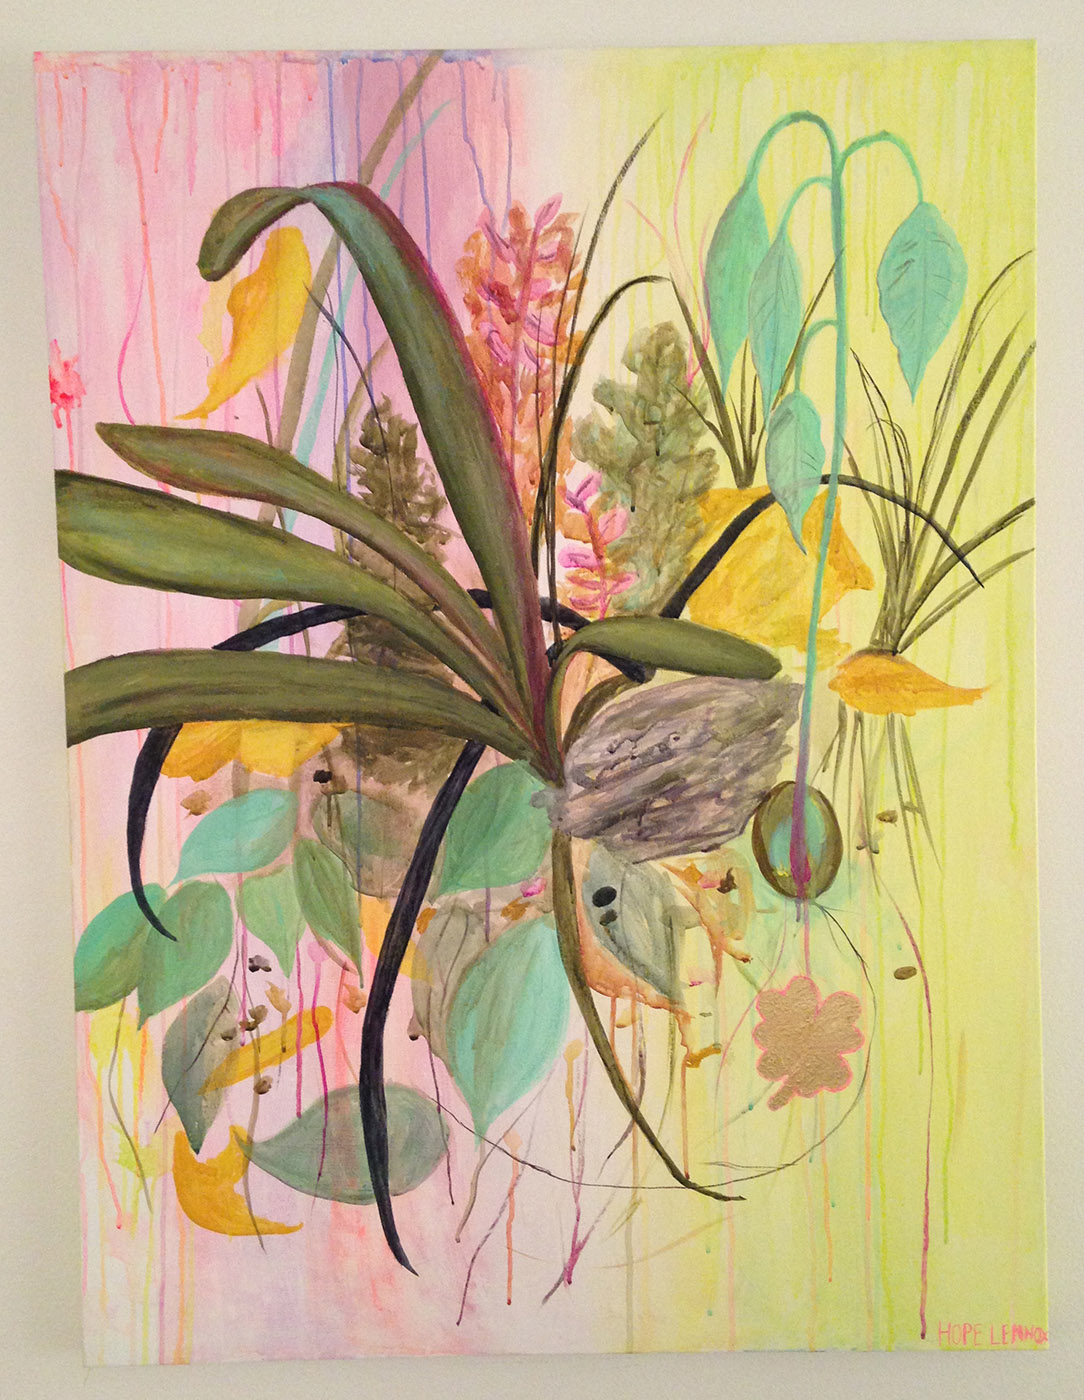 Abstract Botanicals by Hope Lennox